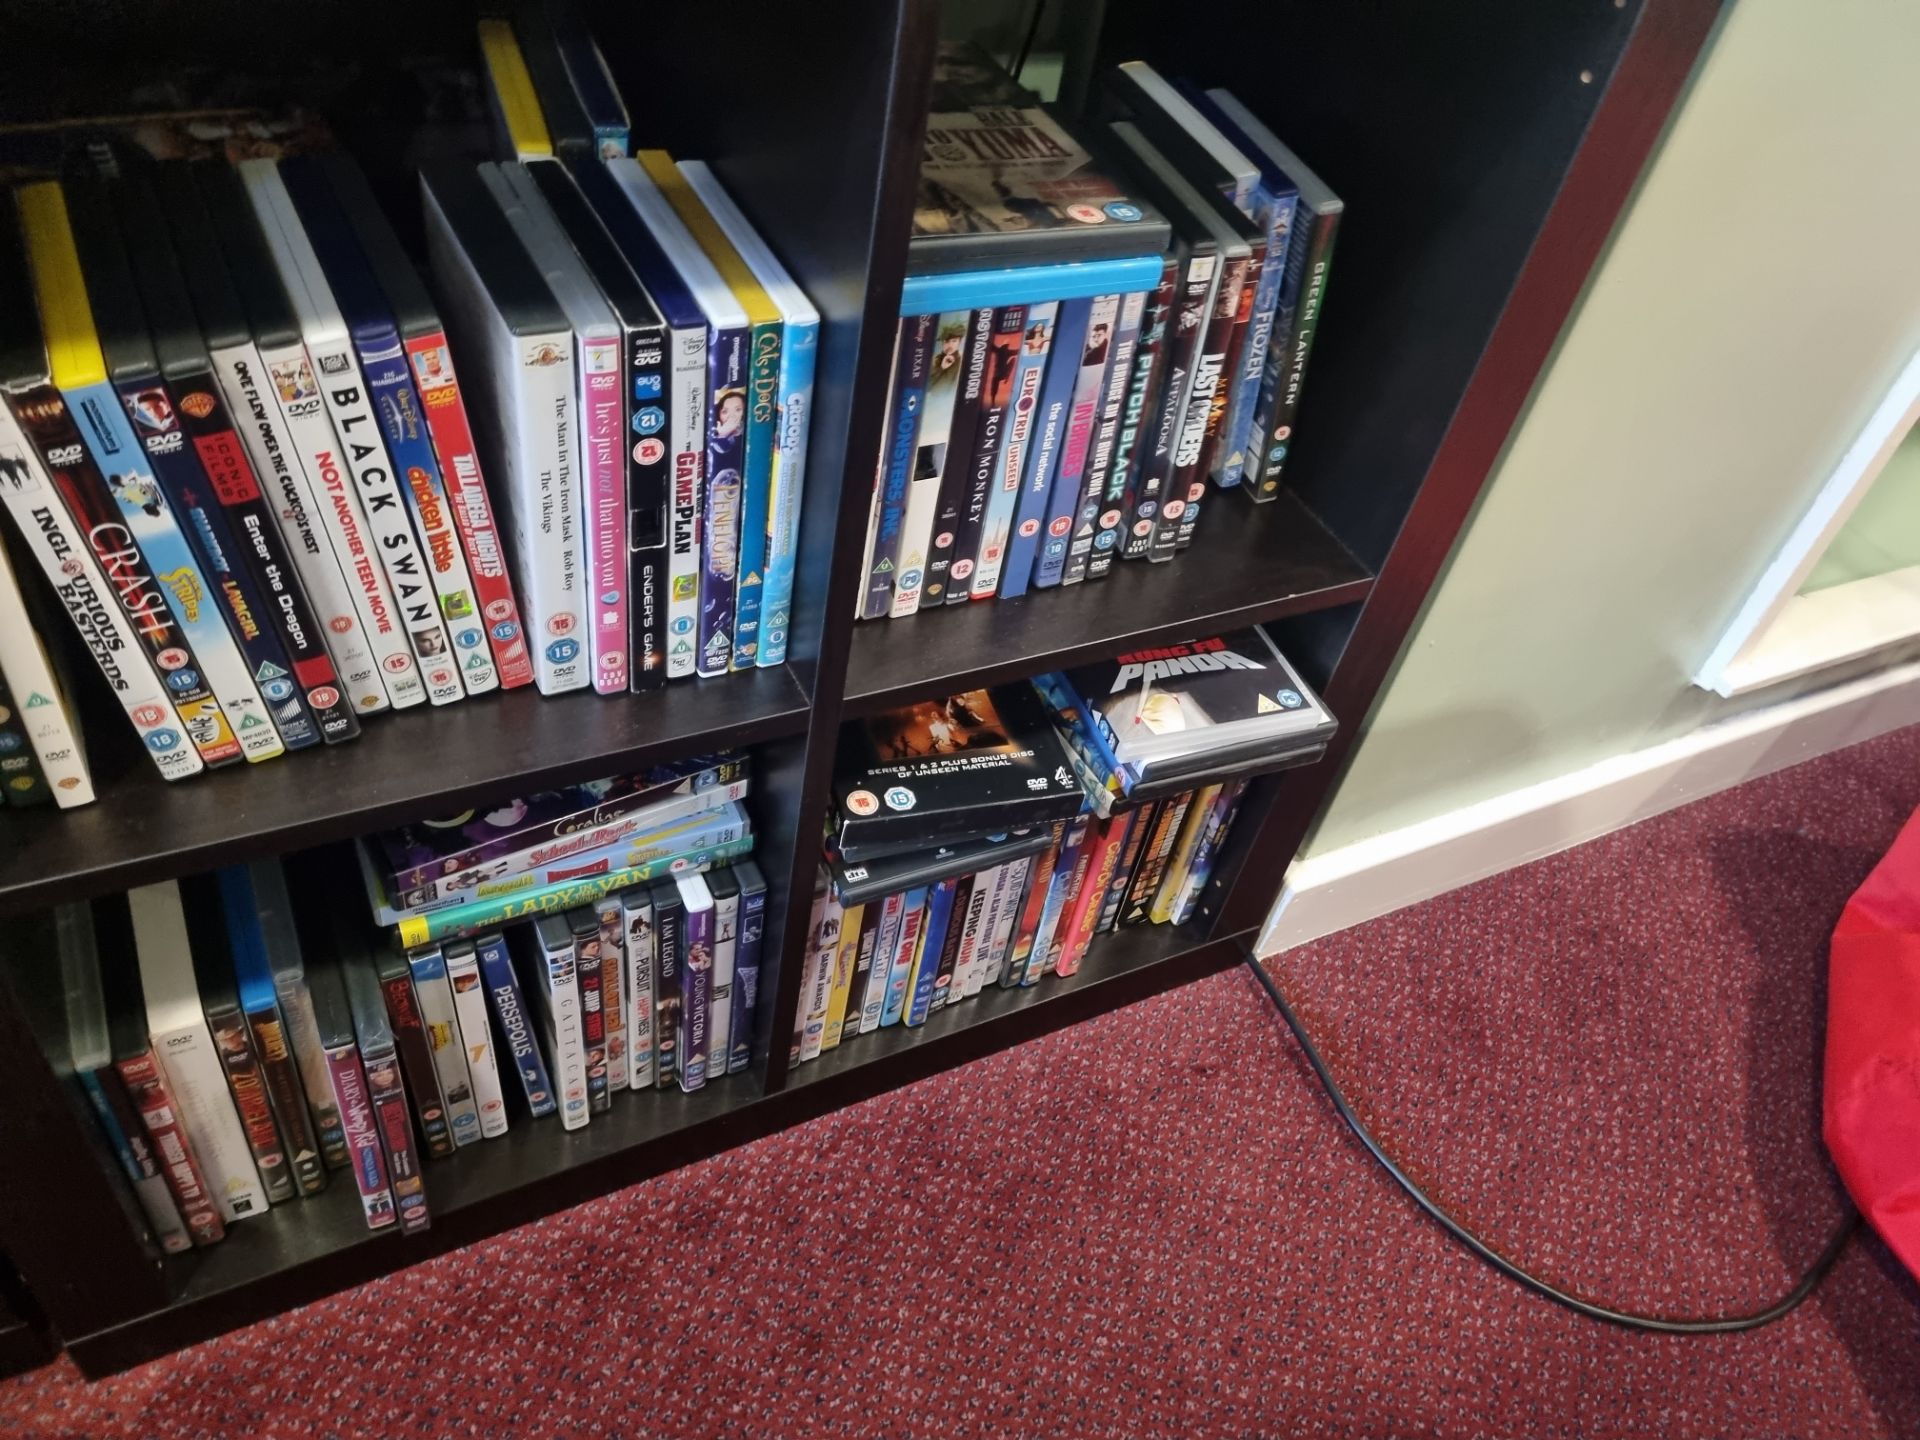 A Large DVD Library as Found